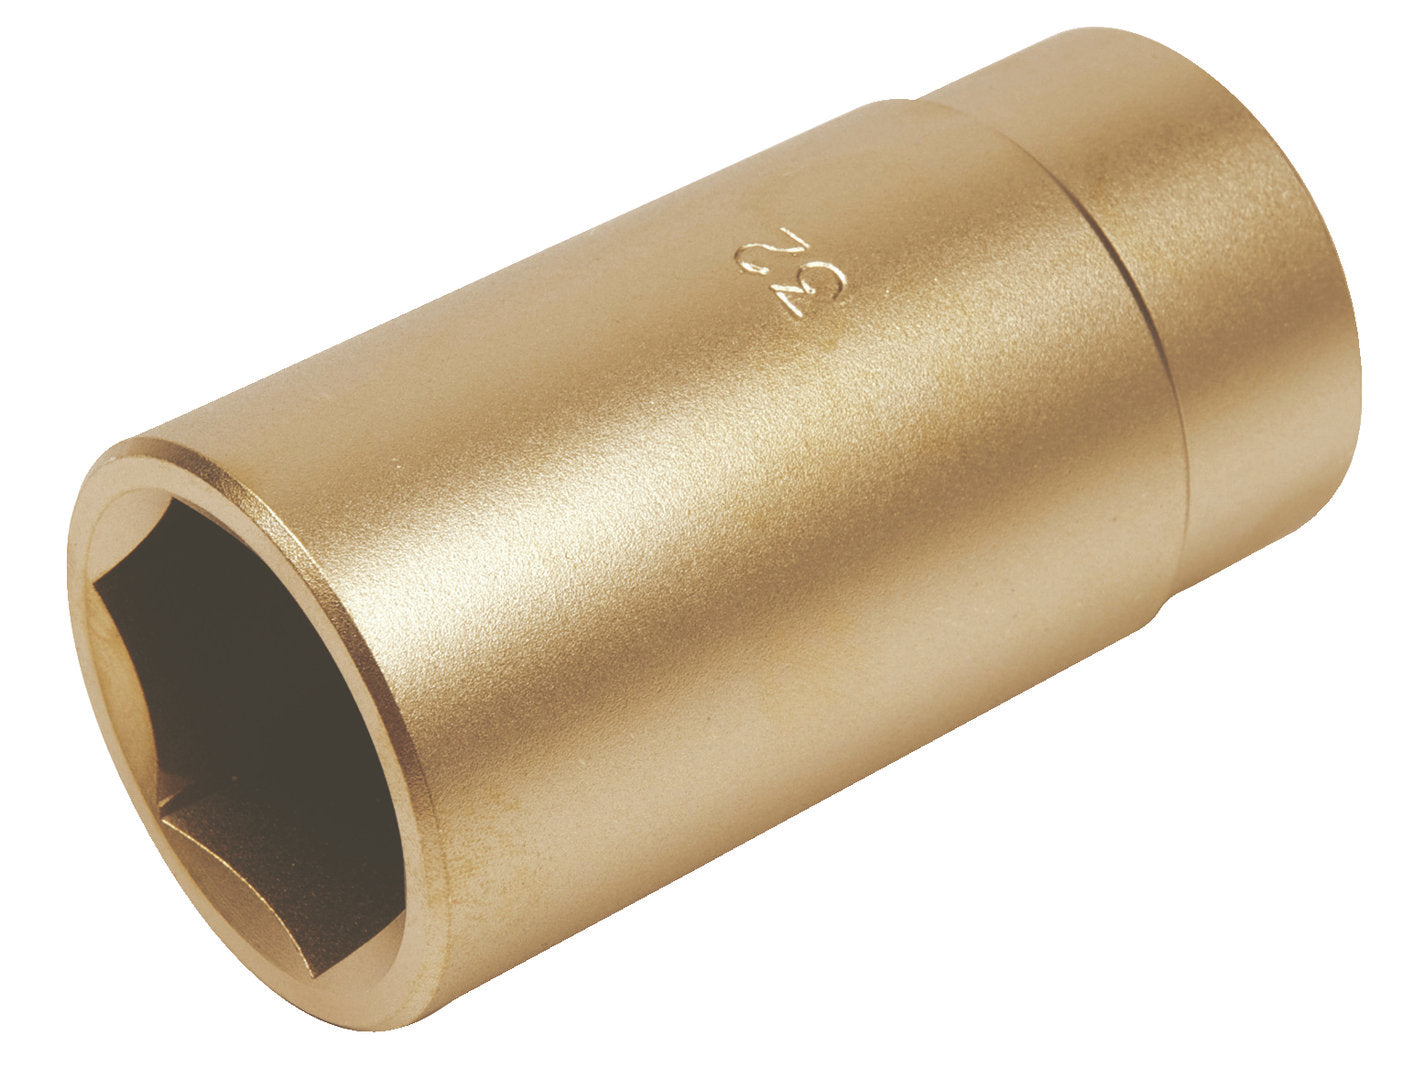 GEDORE GED0350007S - 1/2" hex socket, length 17mm (2523922)